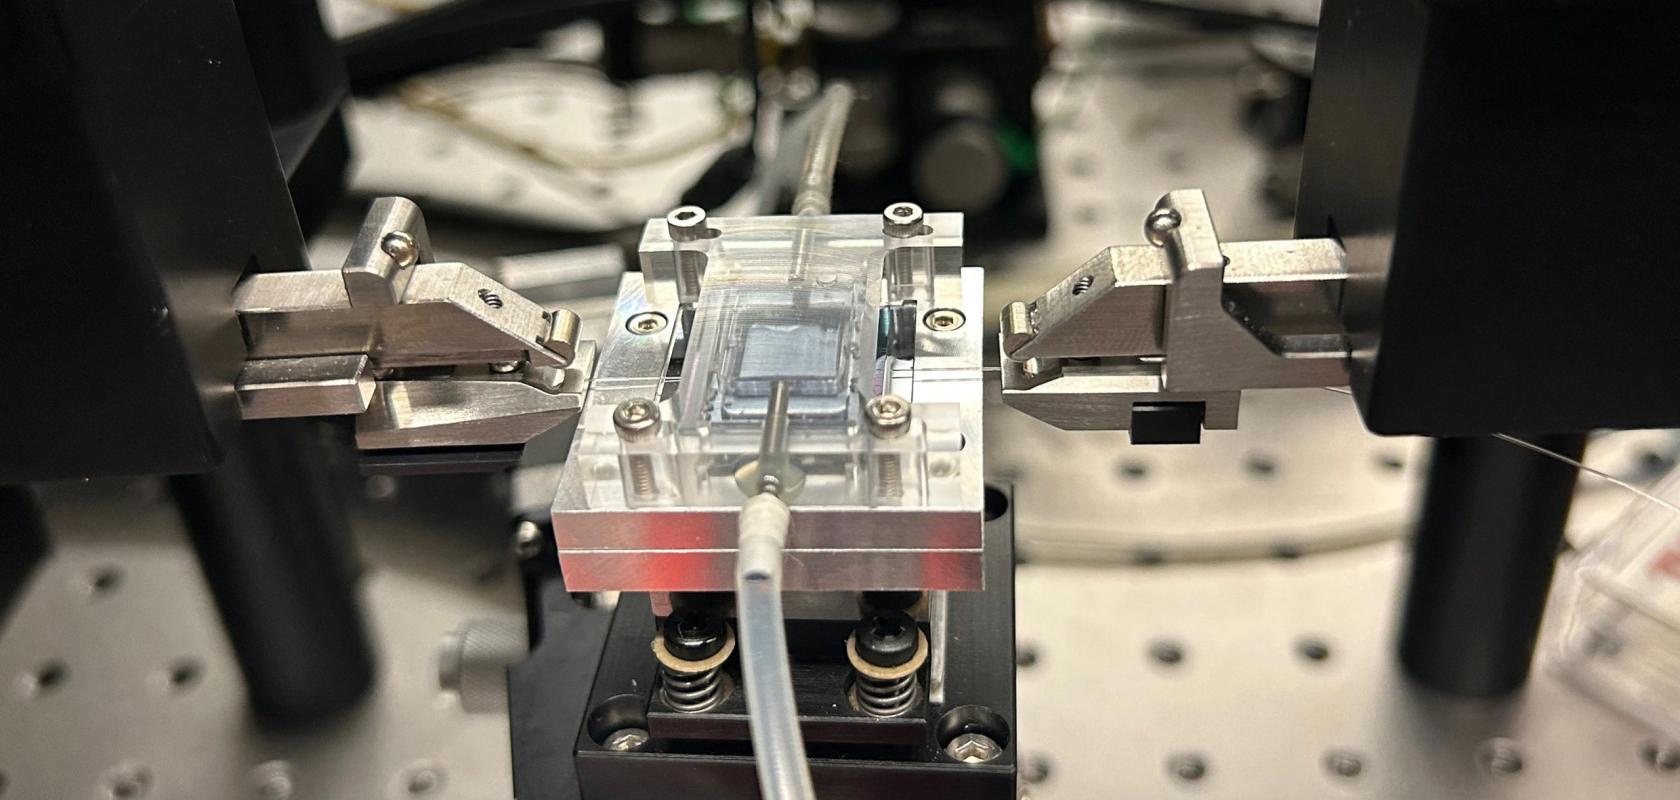 The testing setup for the photonic chip sensor included a microfluidic chamber to transport analyte solutions and optical fibres